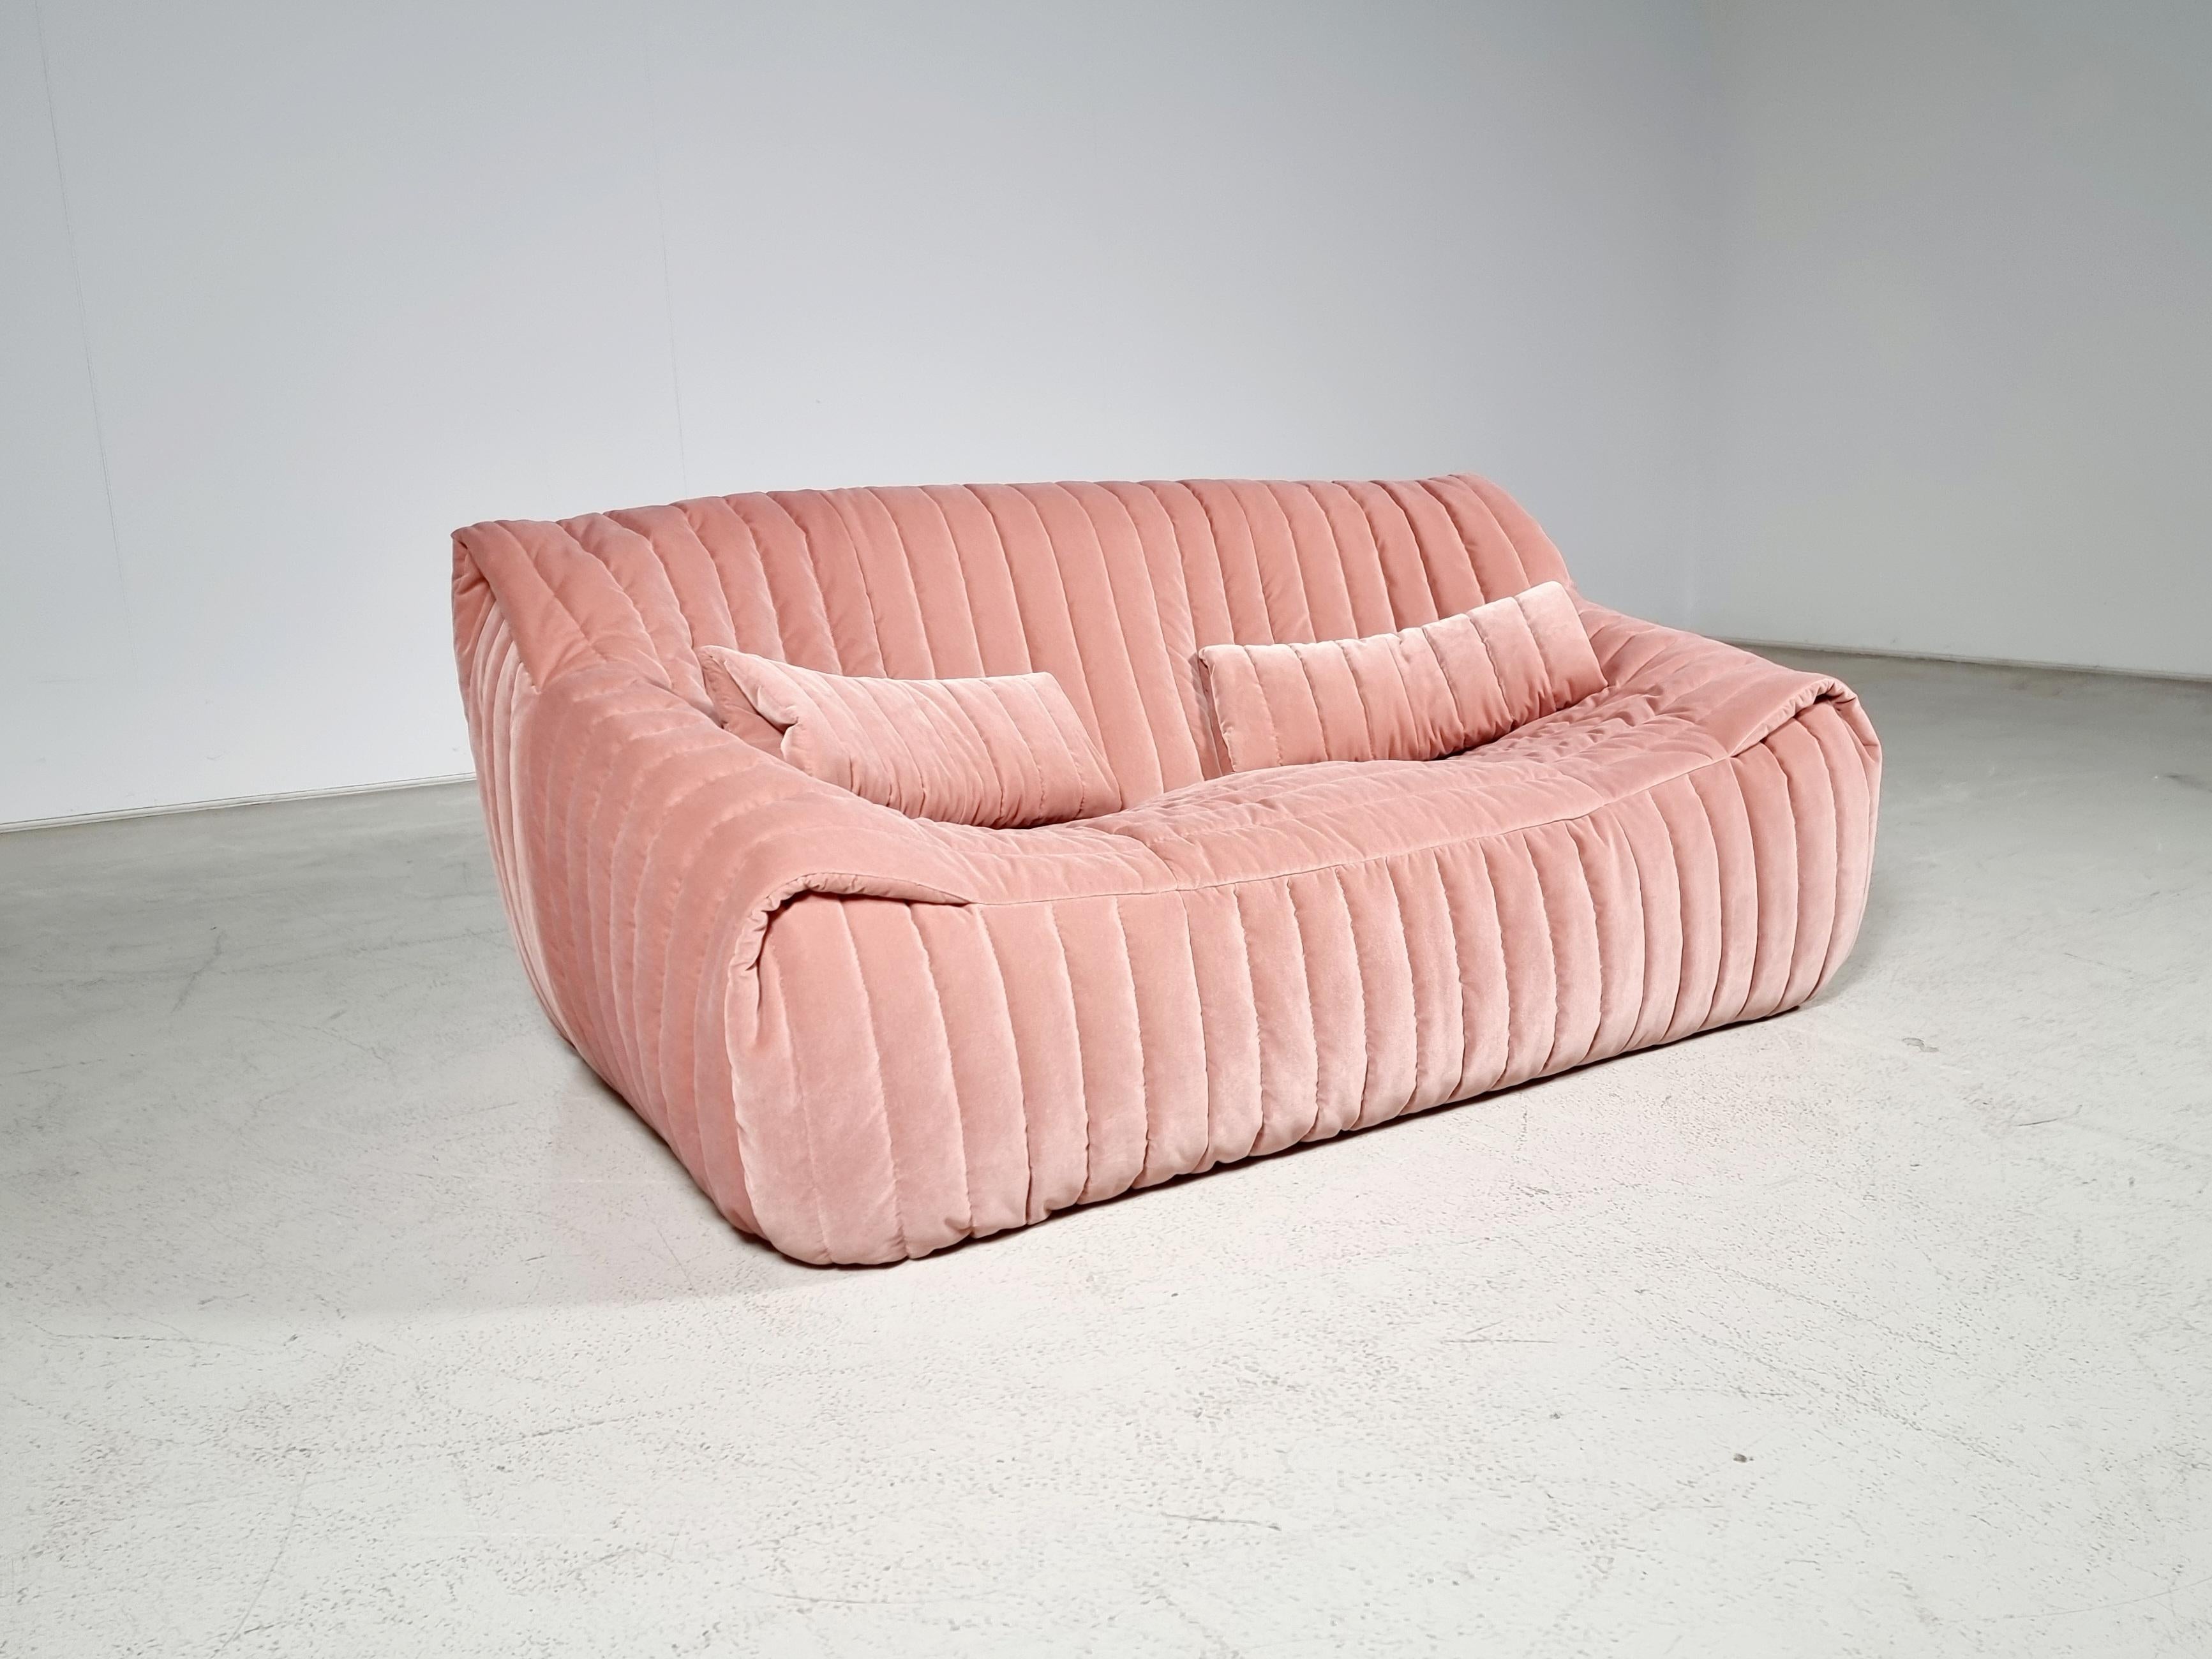 The Sandra sofa was designed by Annie Hiéronimus for Cinna after she joined the Roset Bureau d'Etudes in 1976.

Constructed fully from foam, the sofa has a solid form. Reupholstered in a blush pink velvet fabric. It's extremely comfortable. 

